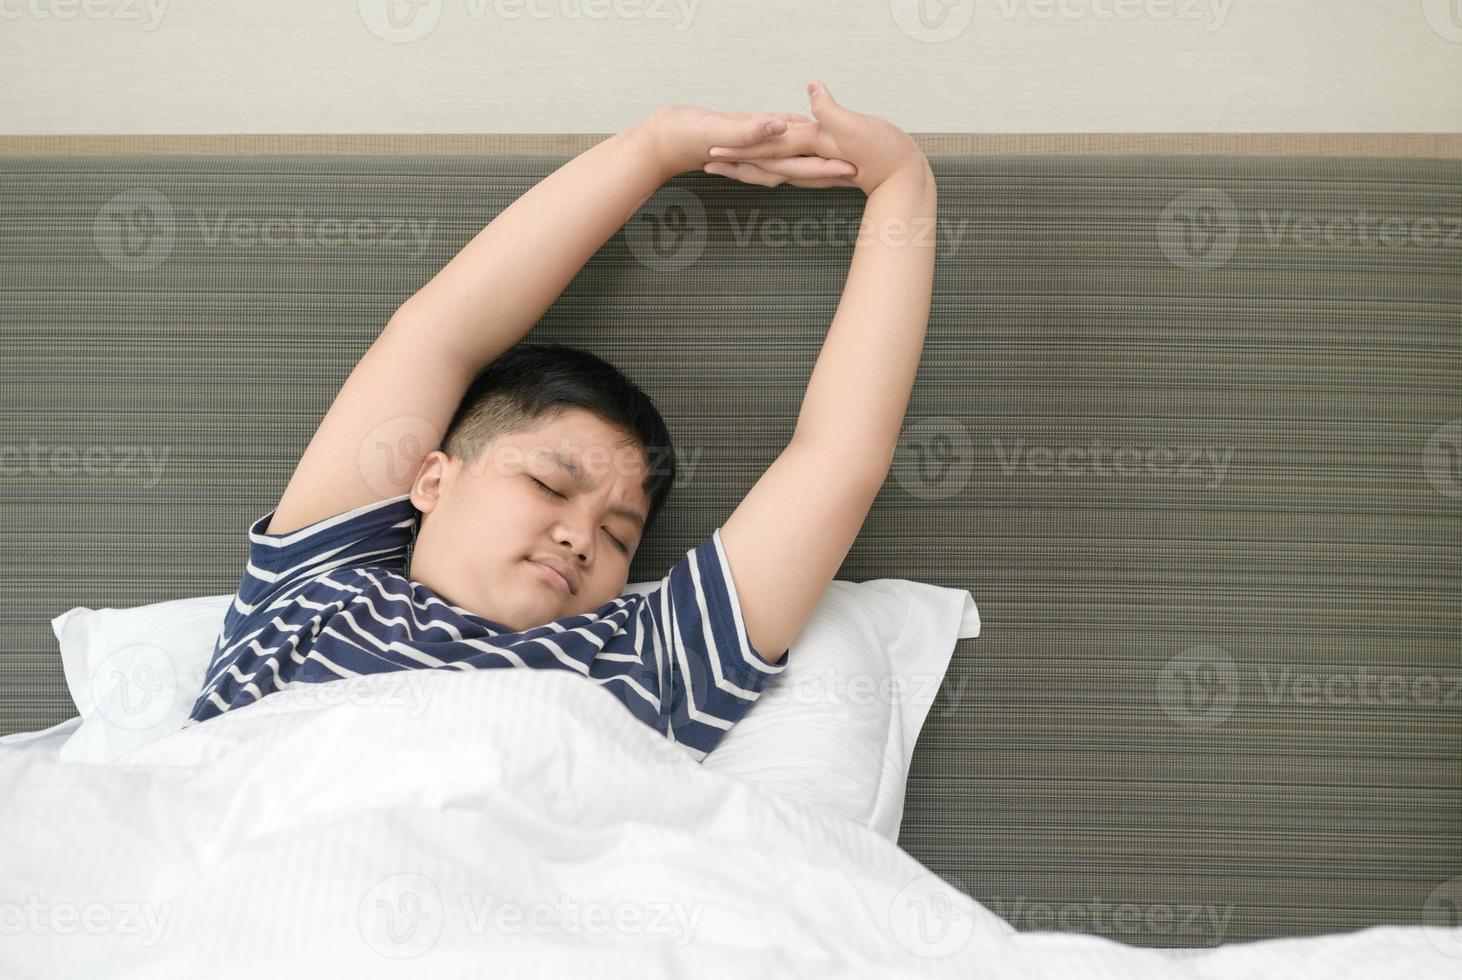 obese fat boy wakes up and stretching on bed in morning, photo